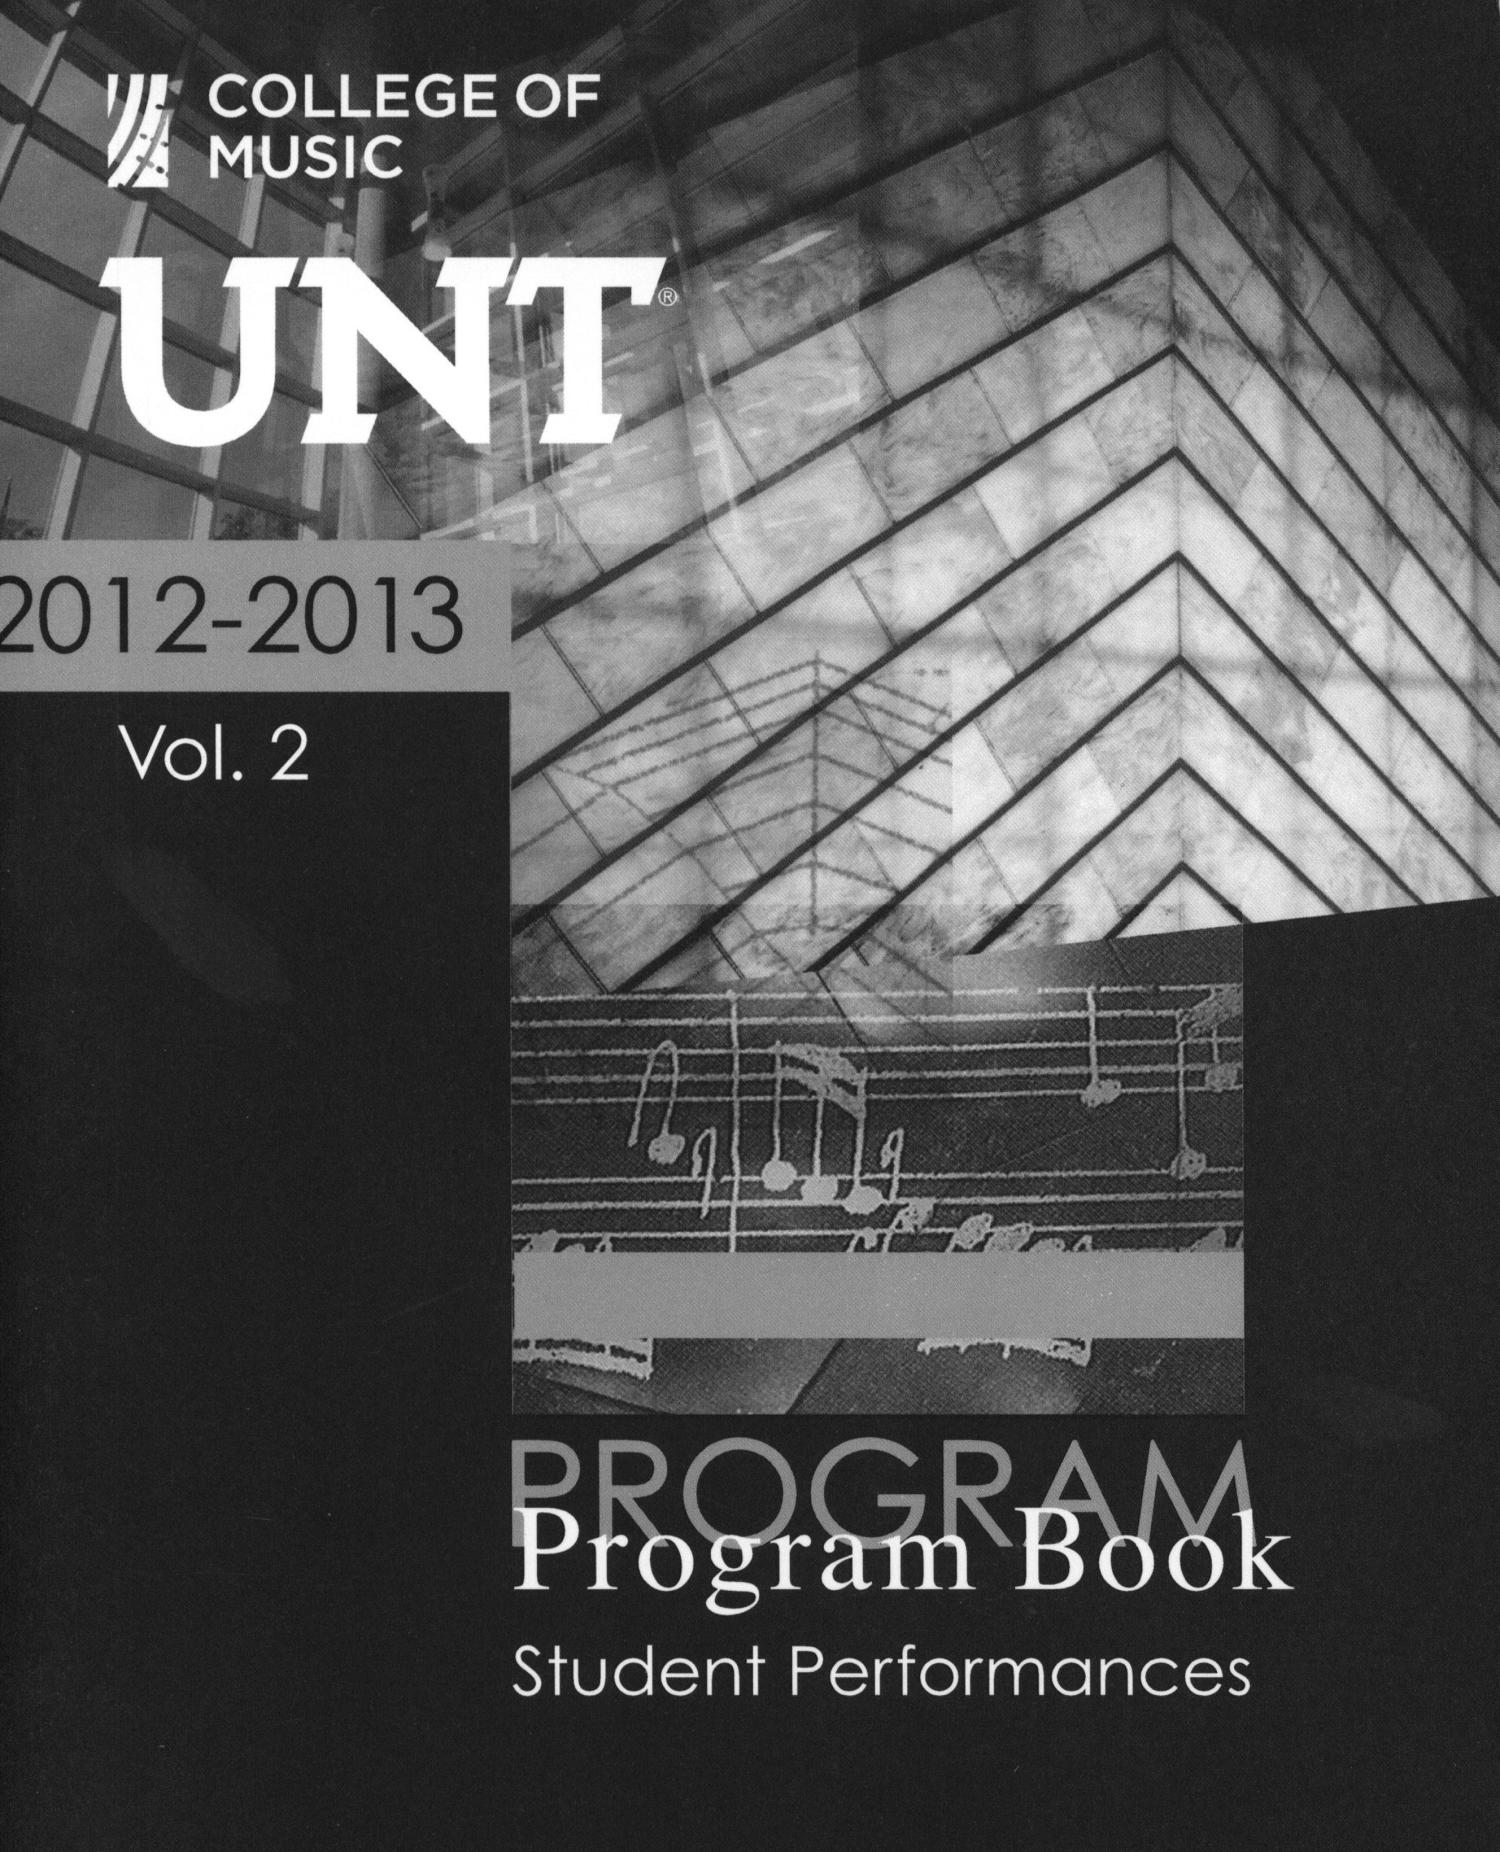 College of Music Program Book 2012-2013: Student Performances, Volume 2
                                                
                                                    Front Cover
                                                